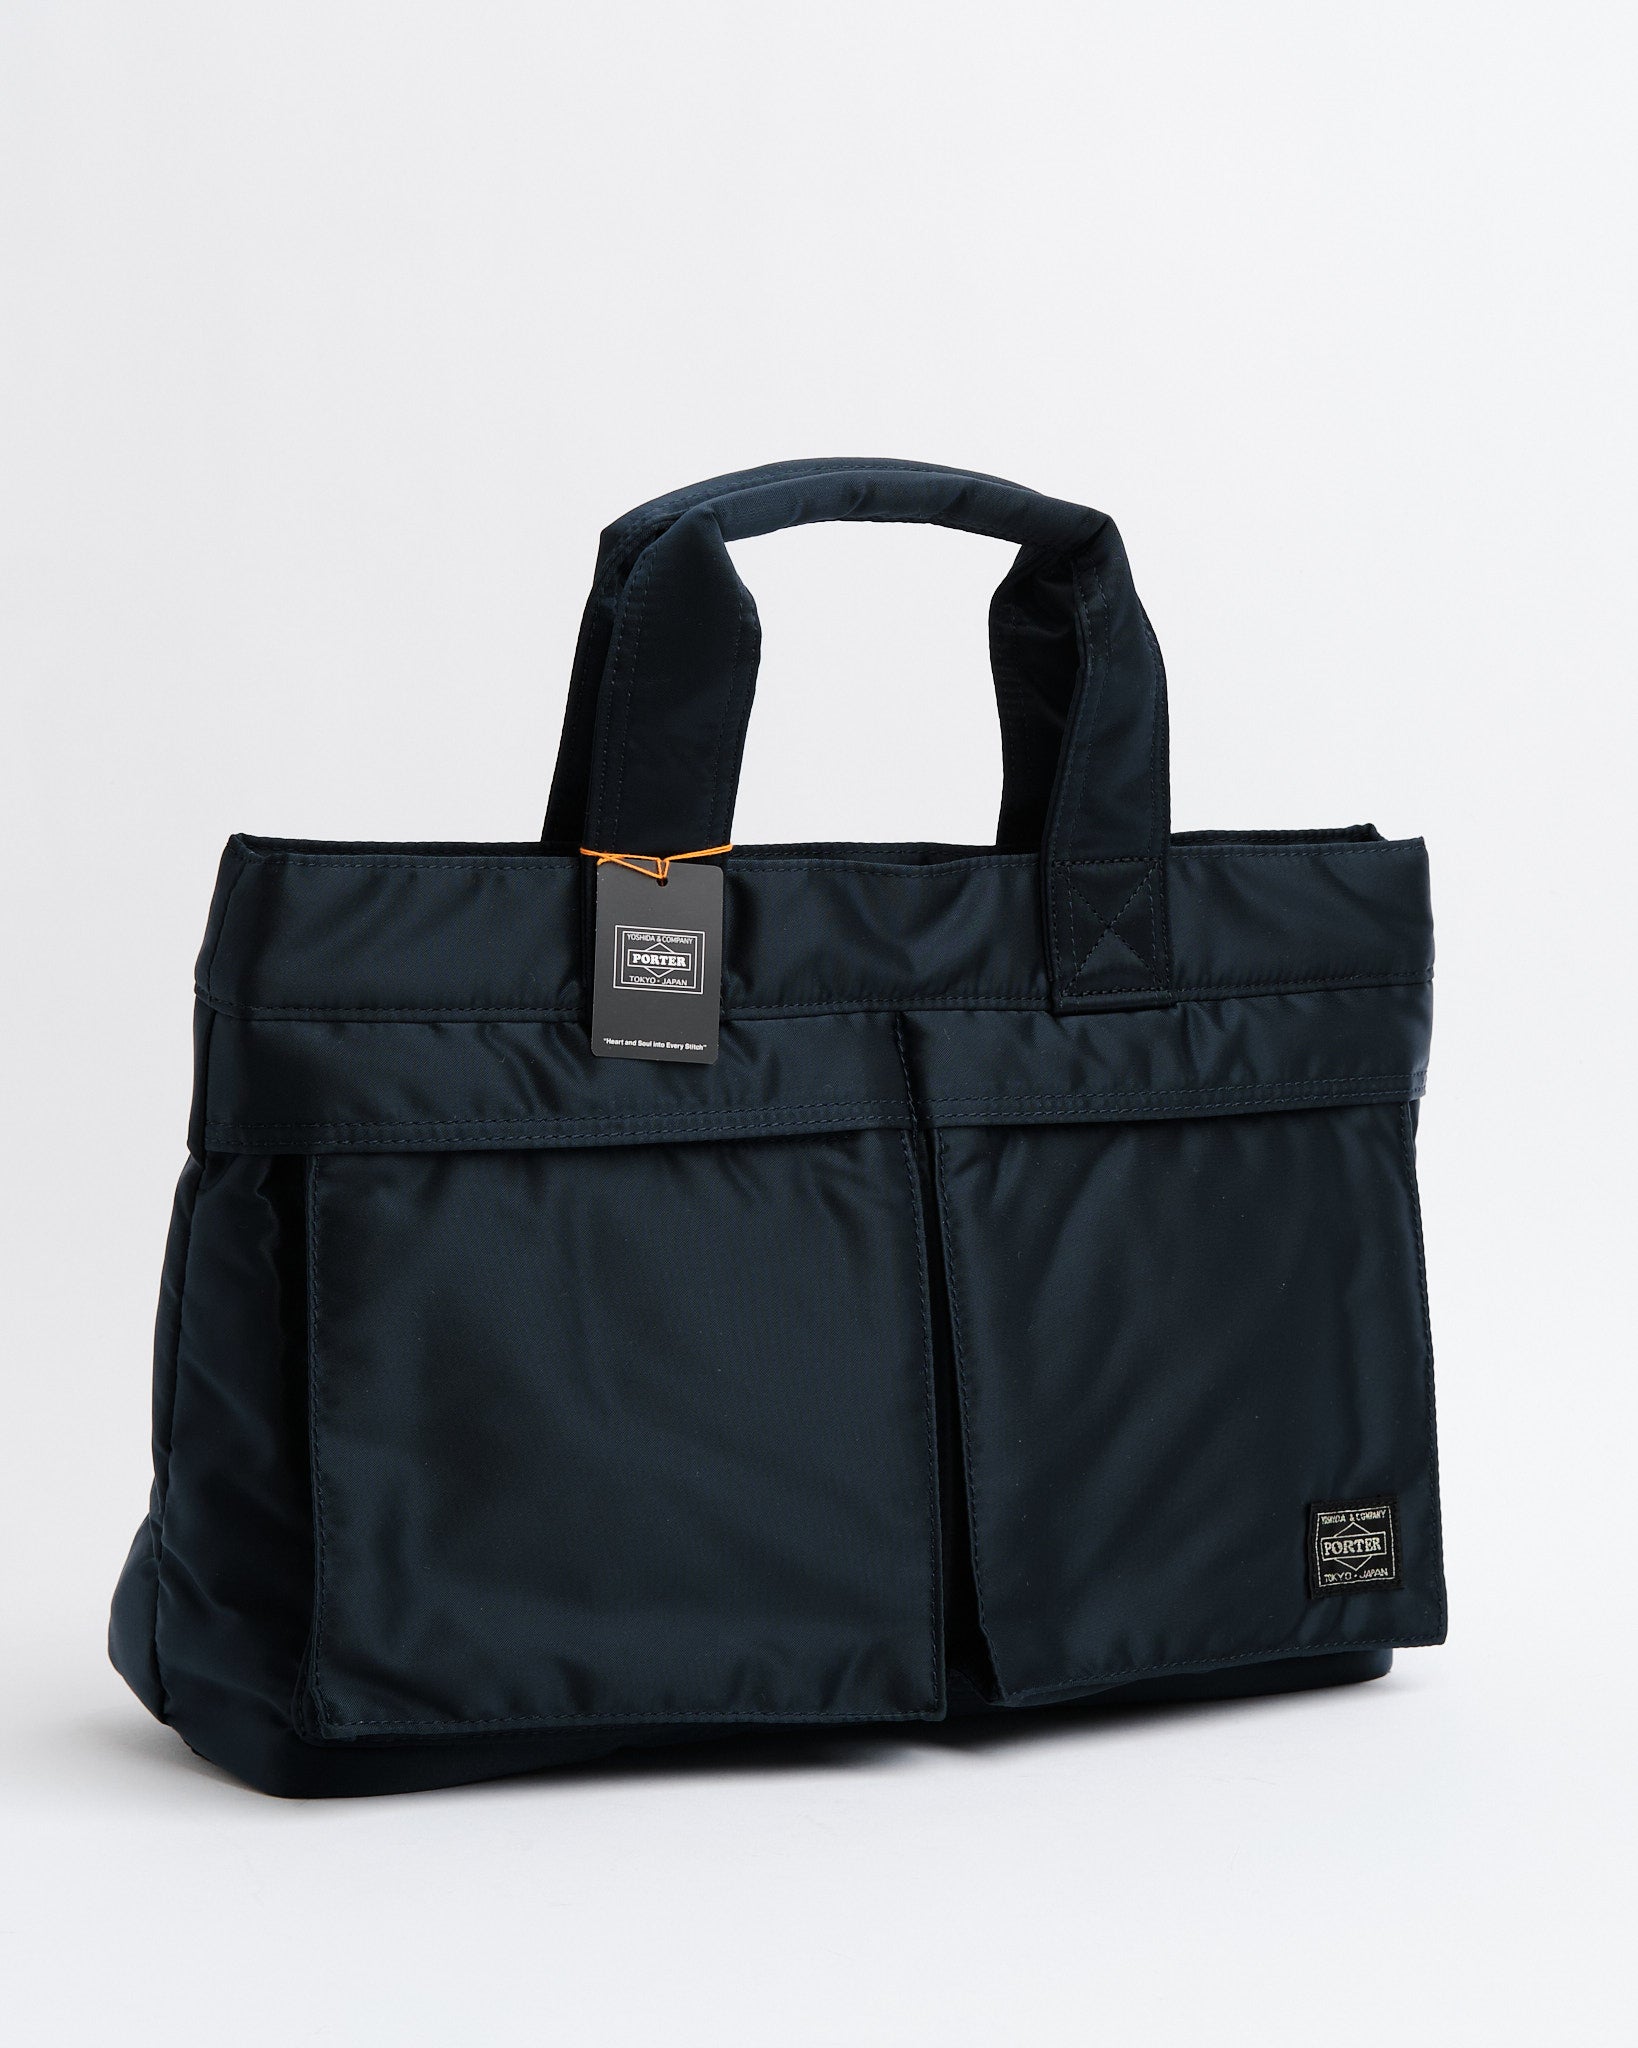 TANKER TOTE BAG IRON BLUE - Meadow